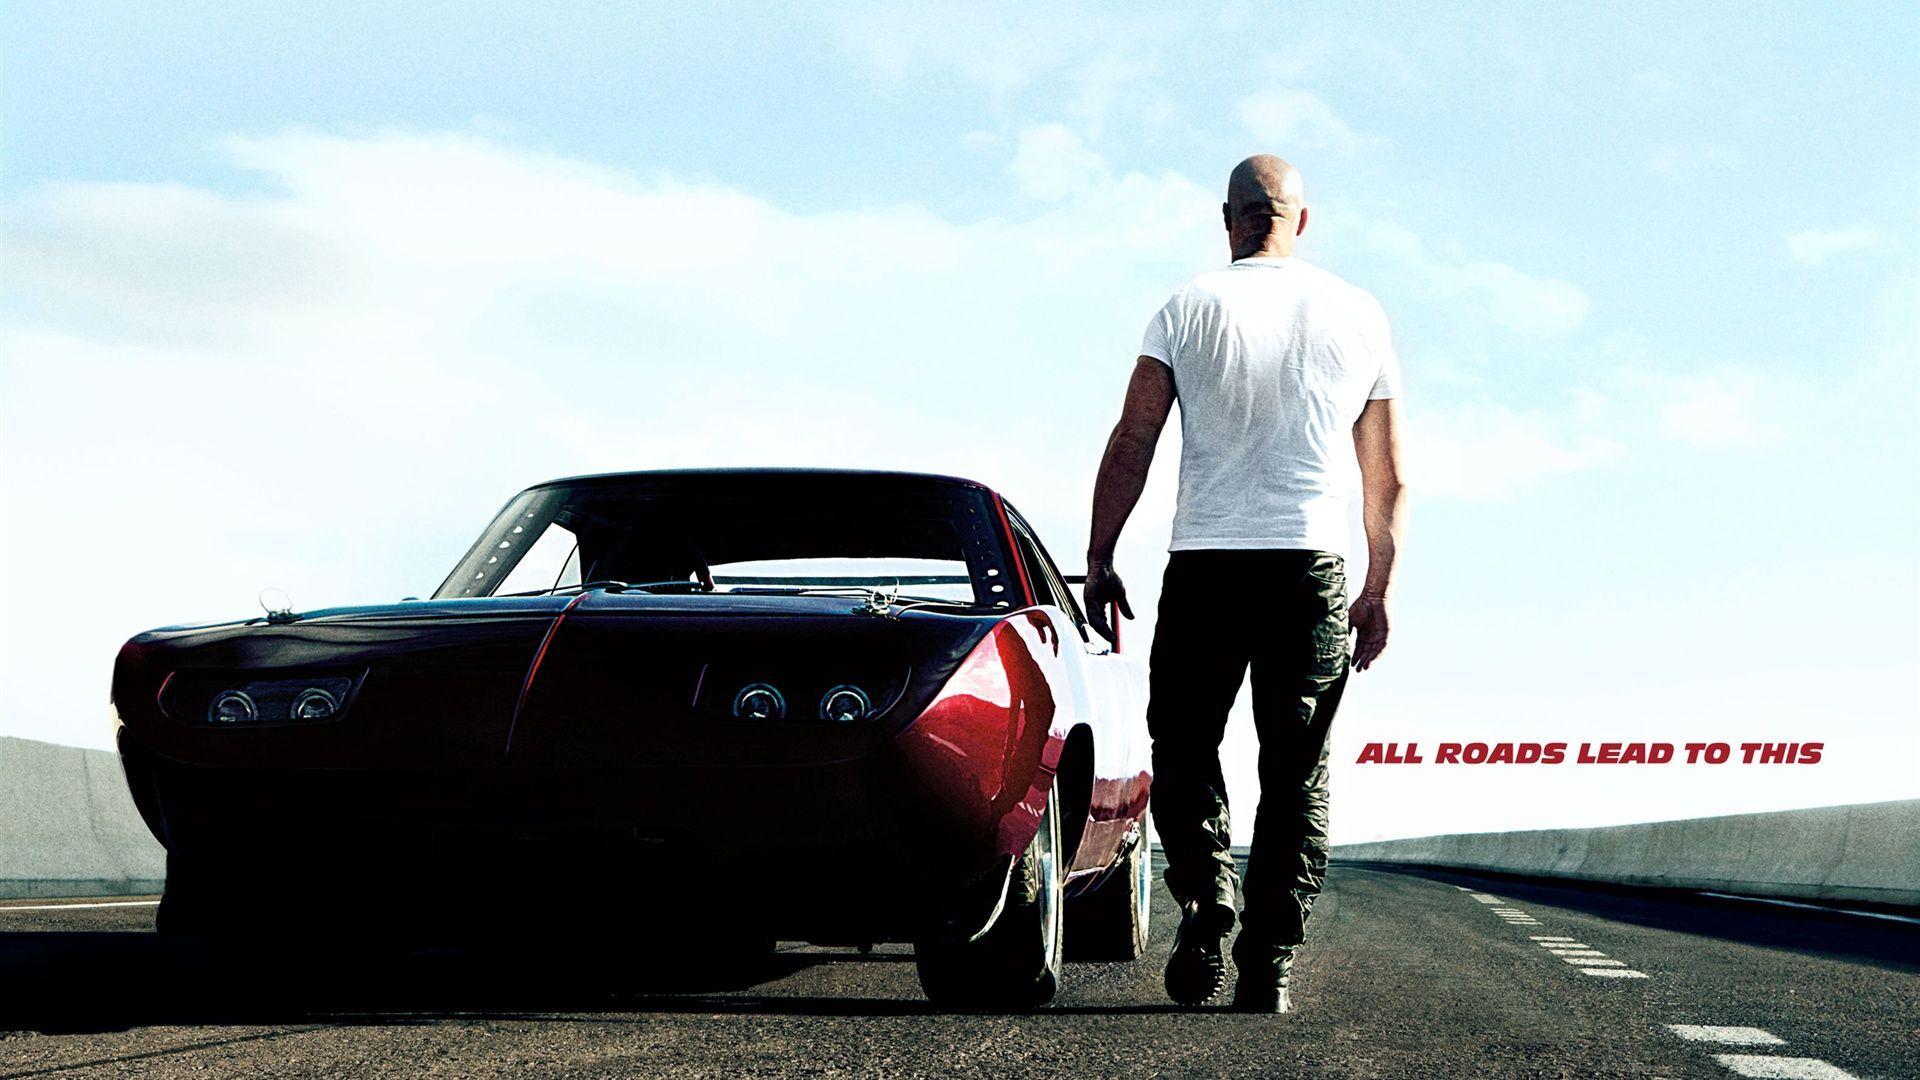 Fast and Furious Desktop Wallpapers